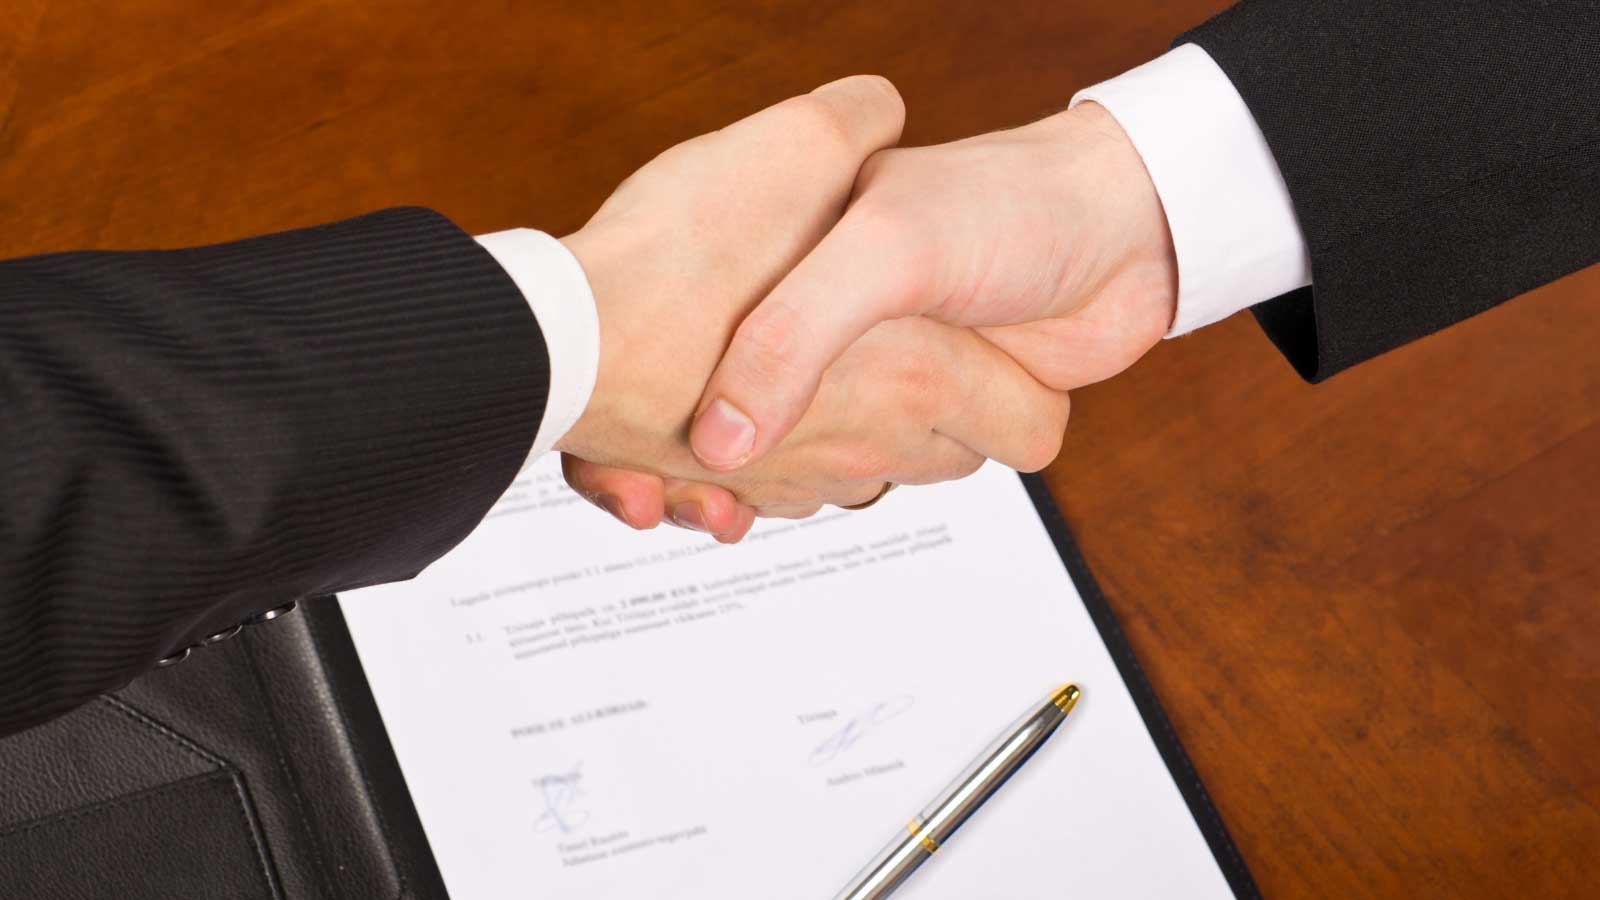 Two people in suits shaking hands over a signed contract on a wooden table